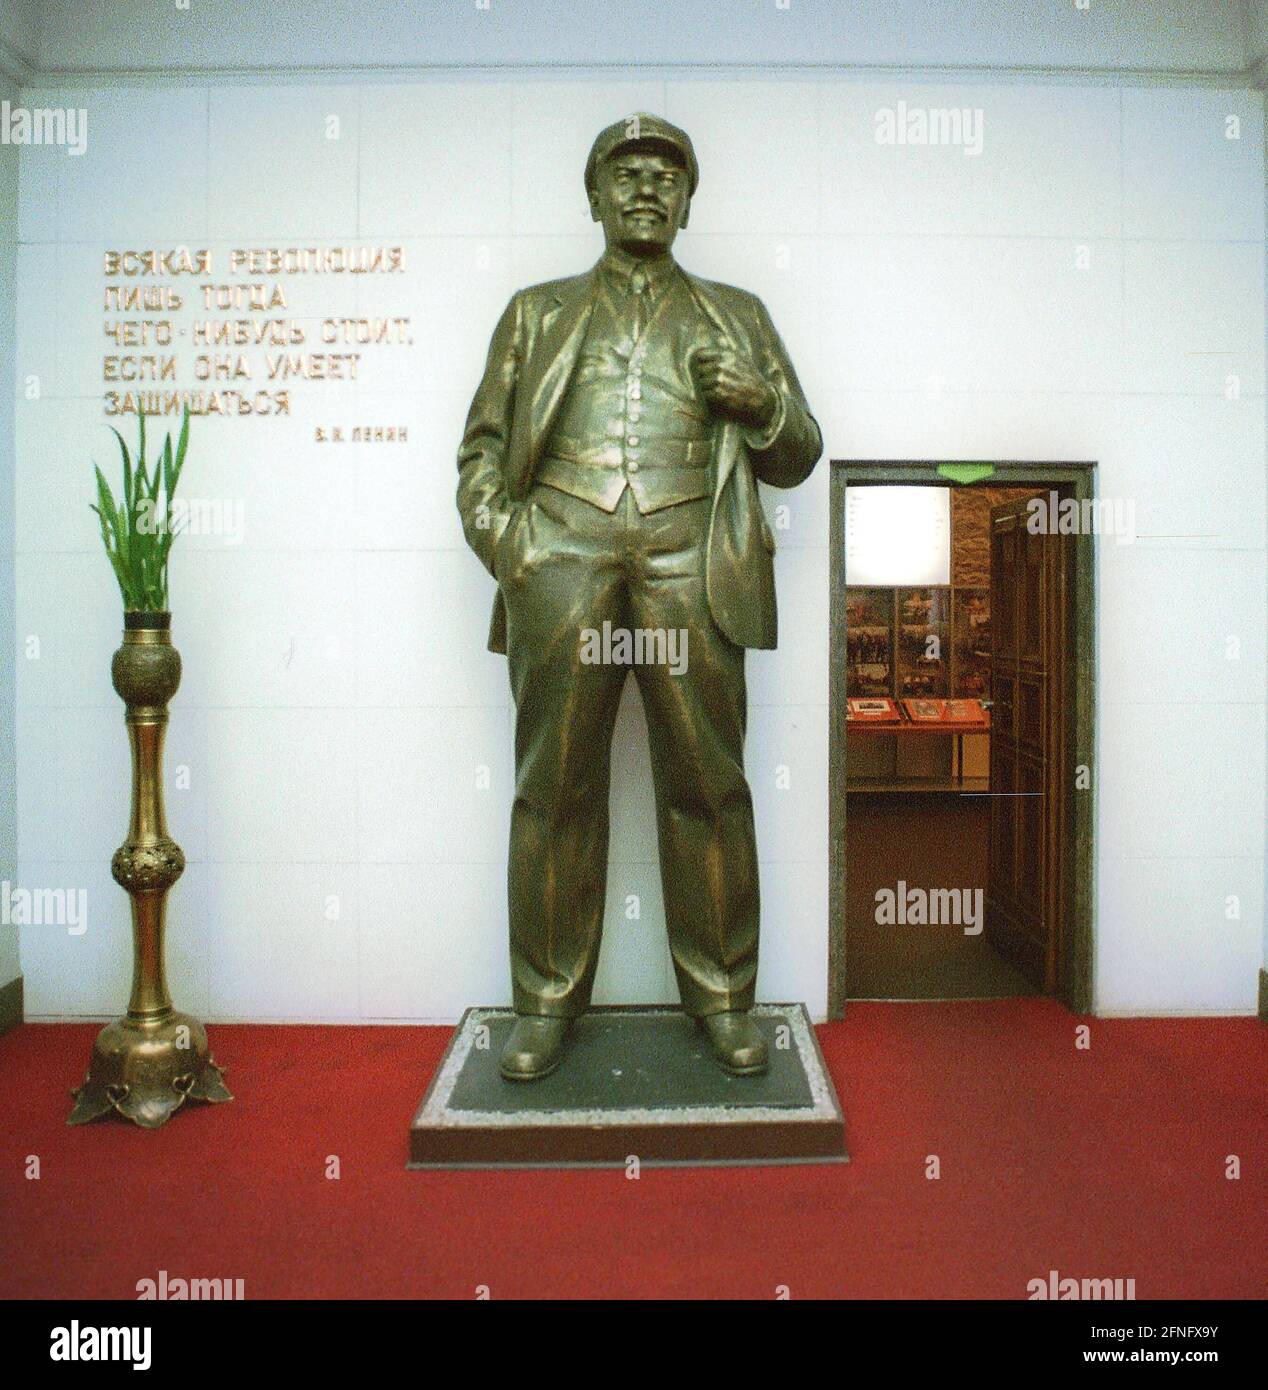 Berlin / History / 1994 Karlshorst, surrender museum. There the German leadership signed the surrender to the Soviet Union in 1945. The photo shows a standard Lenin, as it stood everywhere in Europe. The museum is today part of the German Historical Museum // Soviet / Monument / War / Soldier / Russia / [automated translation] Stock Photo